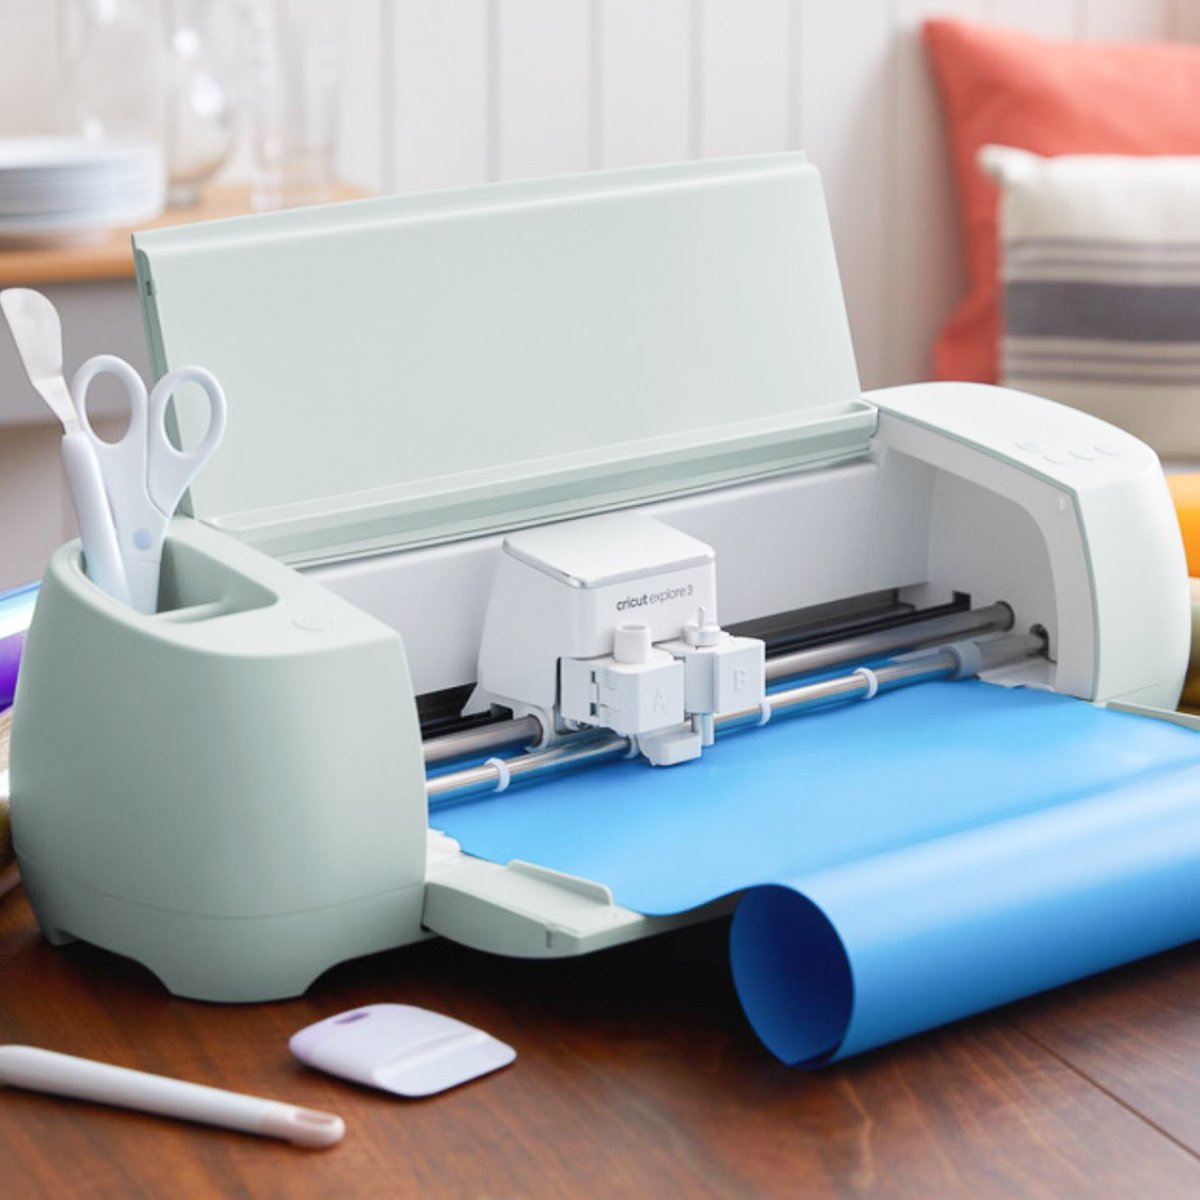 What is the Cricut Explore Machine and What Does it Do?